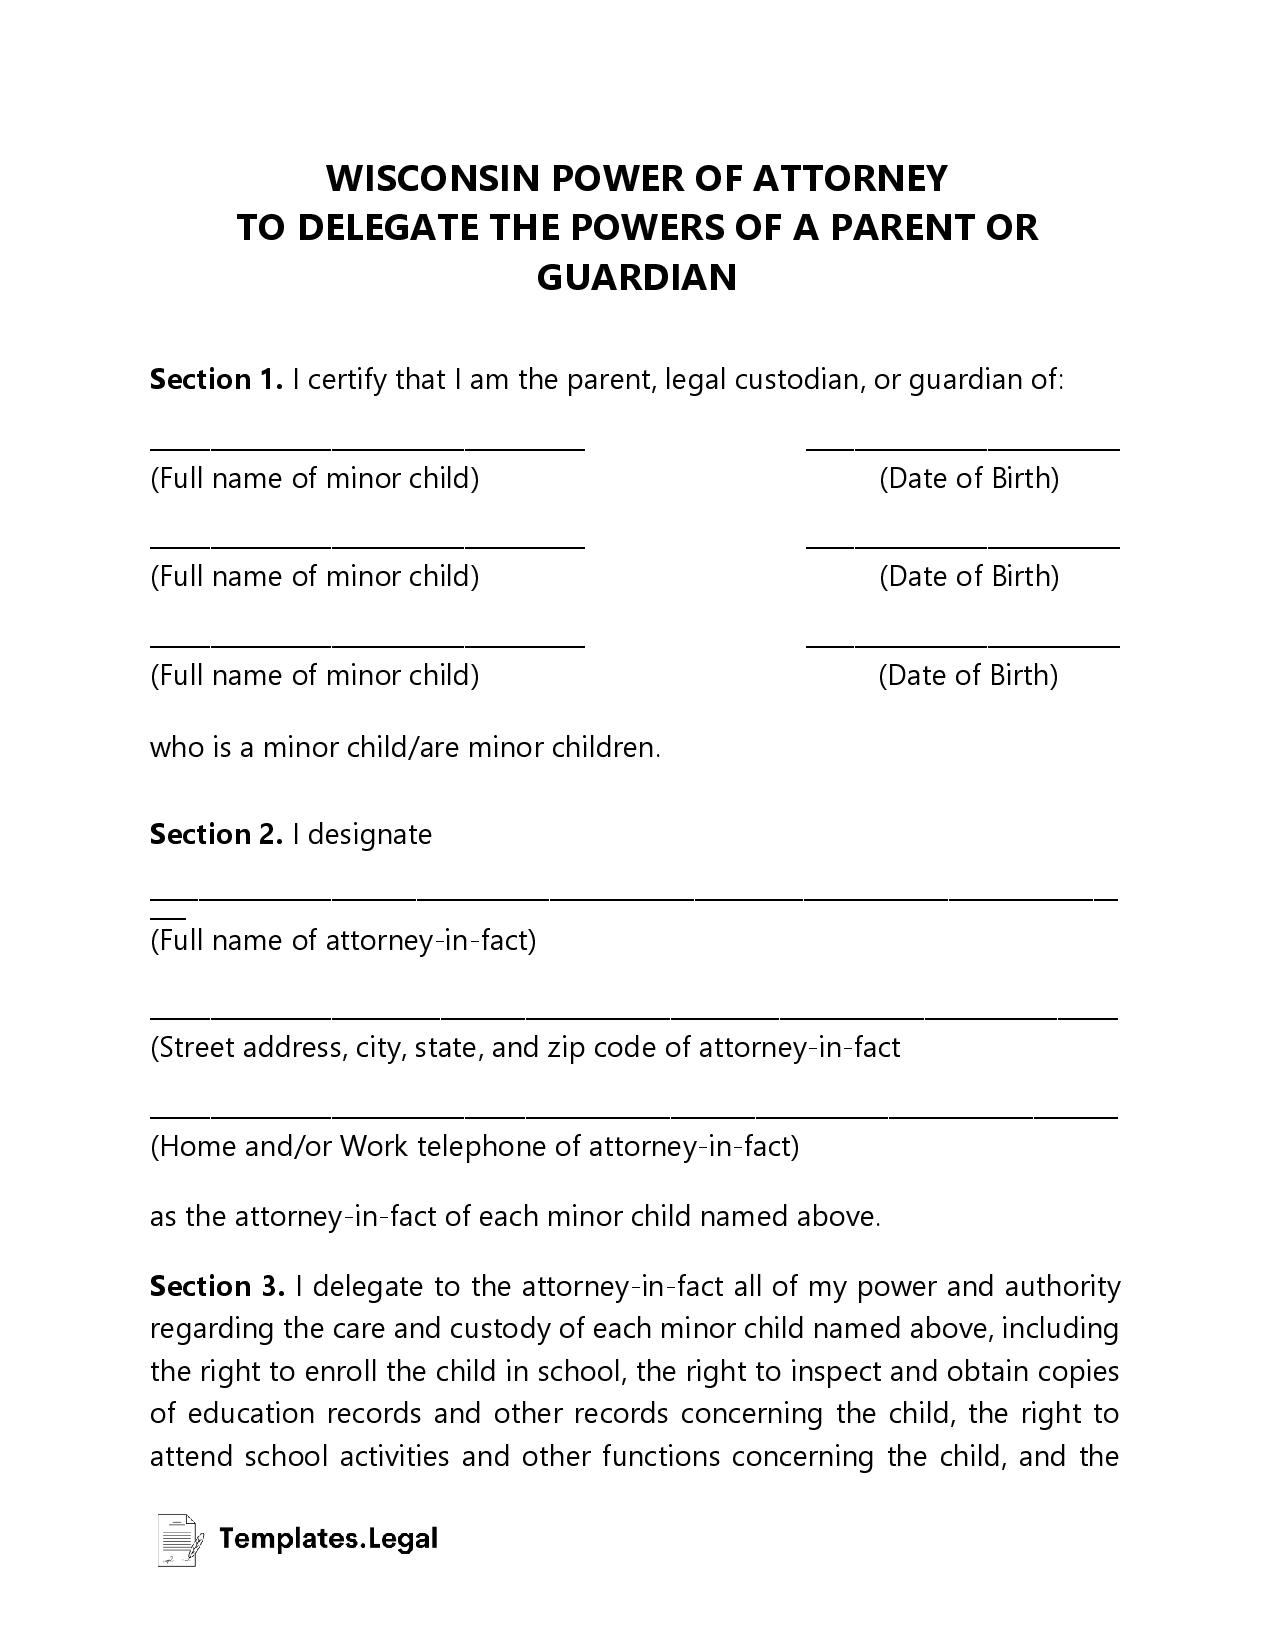 Wisconsin Minor (Child) Power of Attorney - Templates.Legal